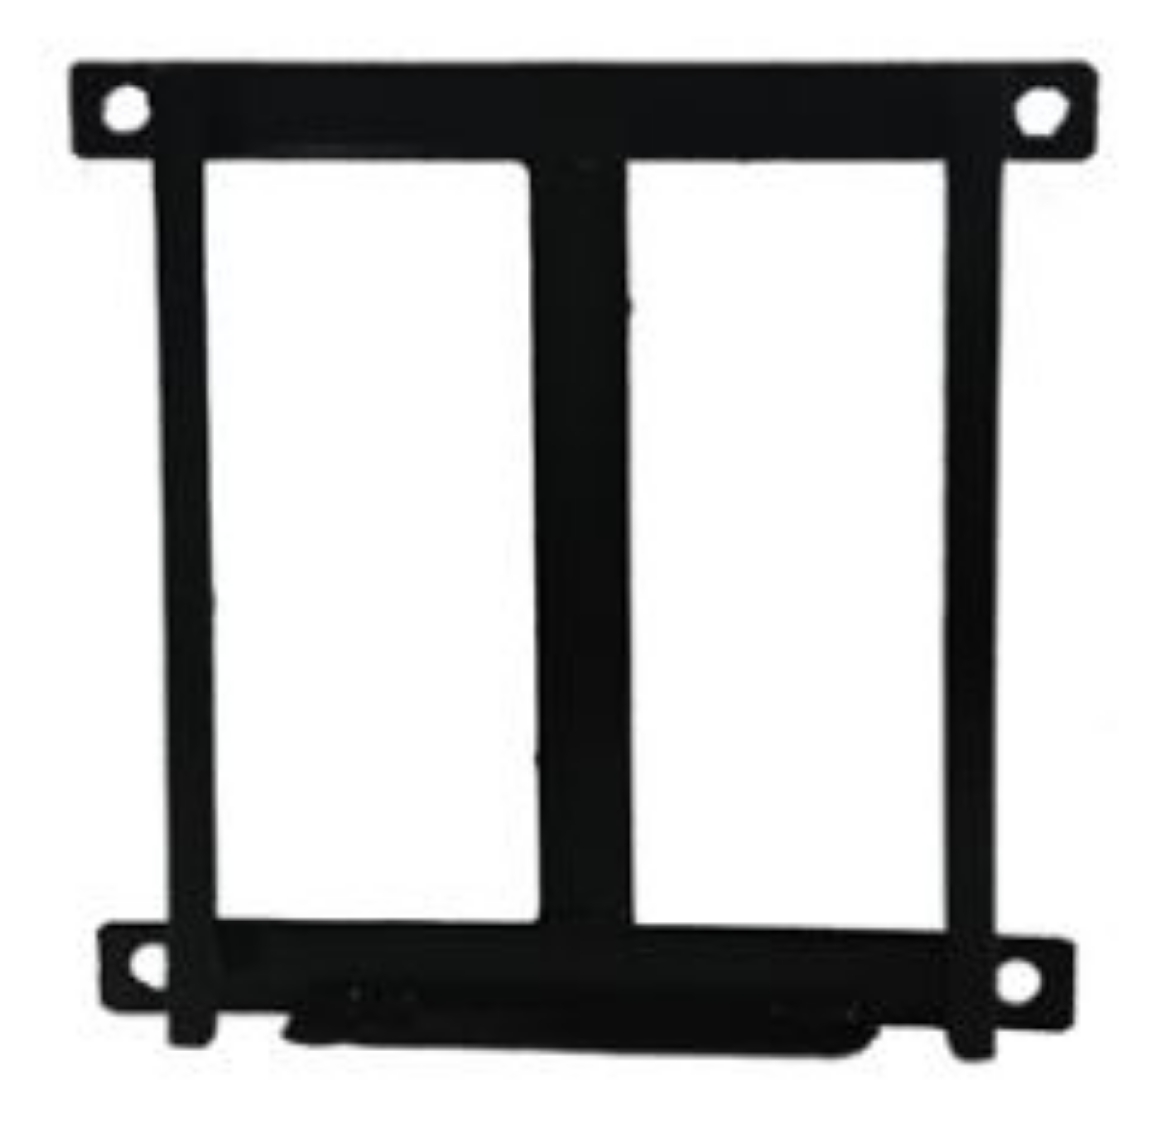 Picture of Metal Bracket to suit 10703 Pyramid Style Wheel Chock
260mm (W) x 32mm (D) x 250mm (H)

Has 4 Holes in Bracket for Bolting Down
Black in Colour